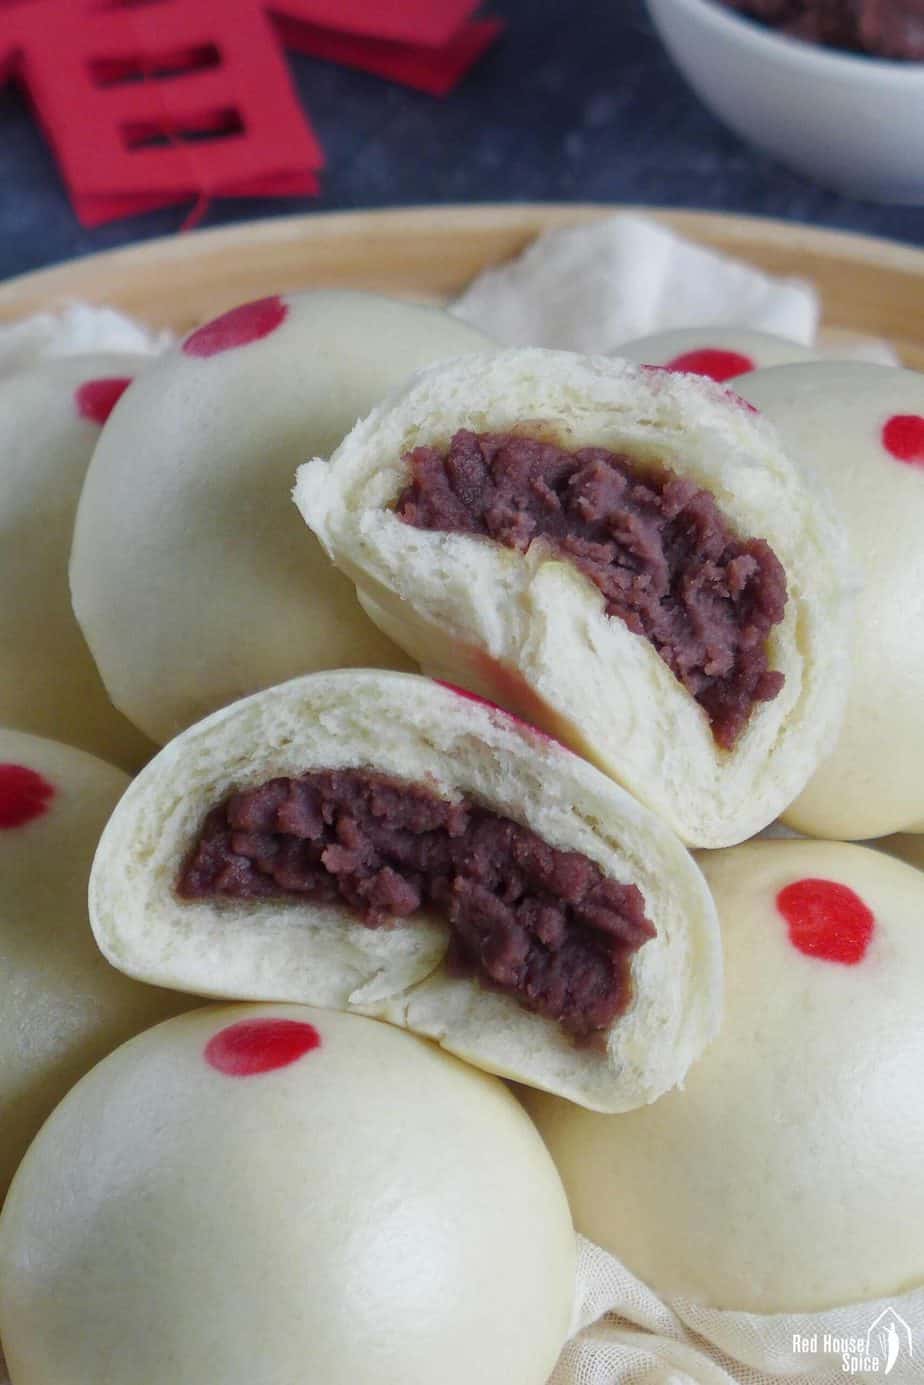 Steamed buns filled with red bean paste.